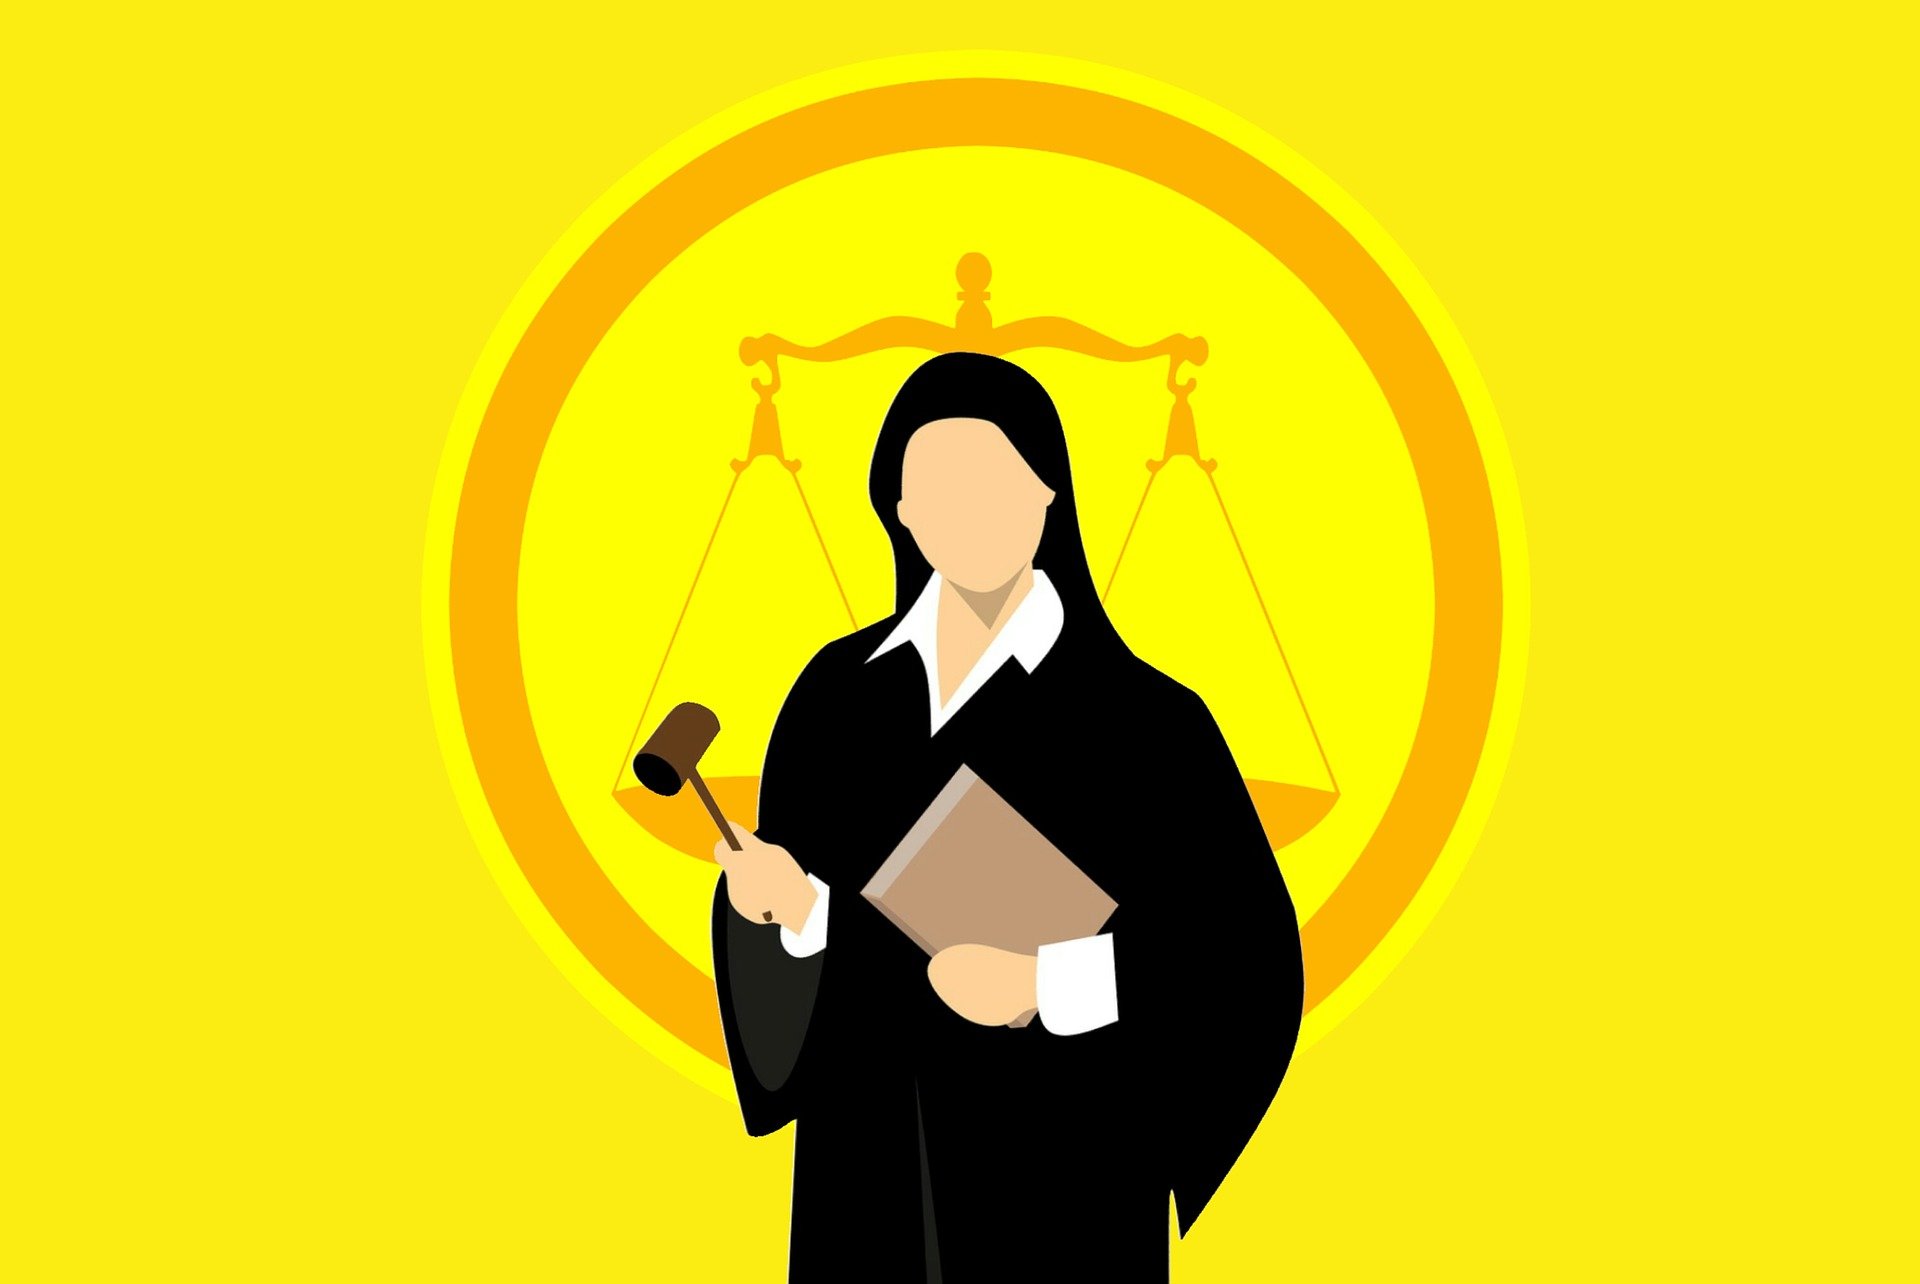 Law University in Nagpur has special course to prepare future judges